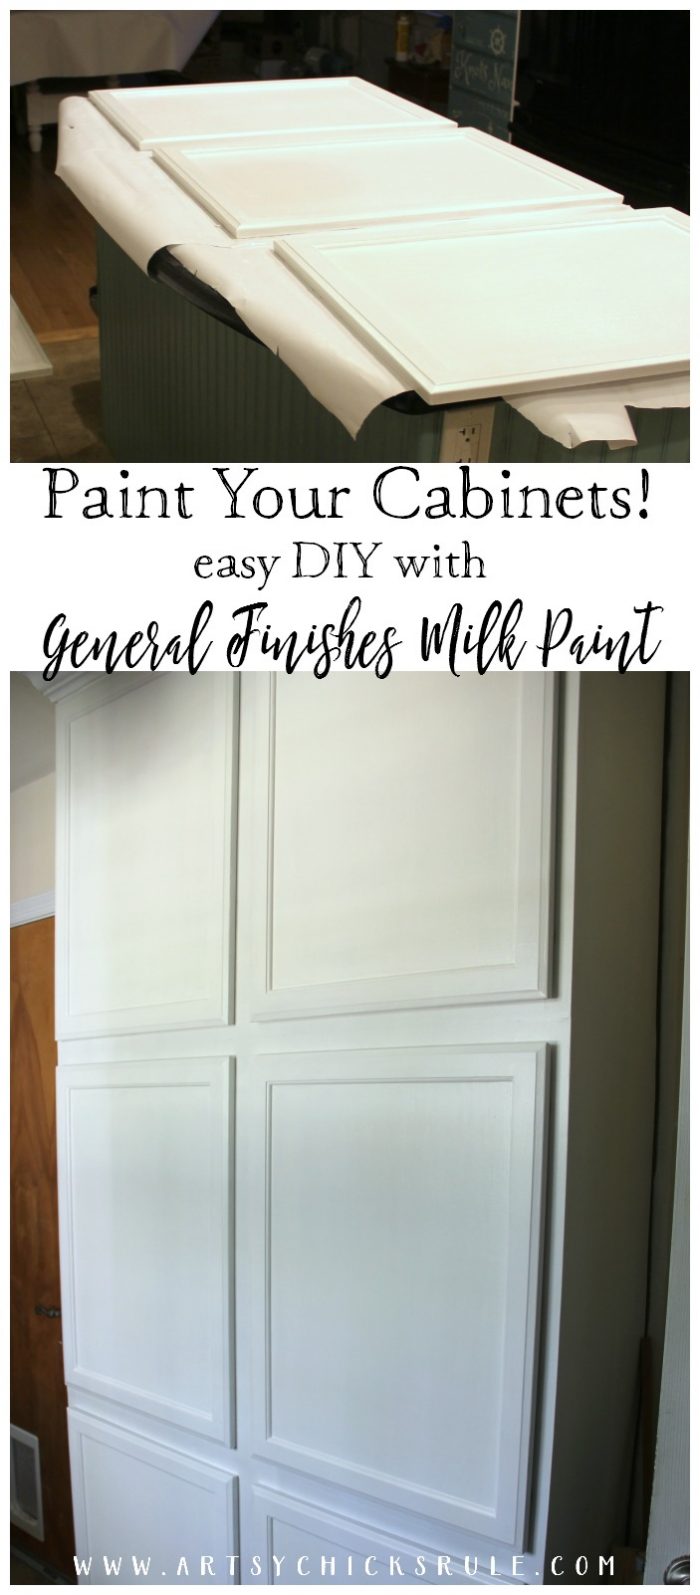 Painted Cabinets with General Finishes Milk Paint (One Room Challenge Week 2)